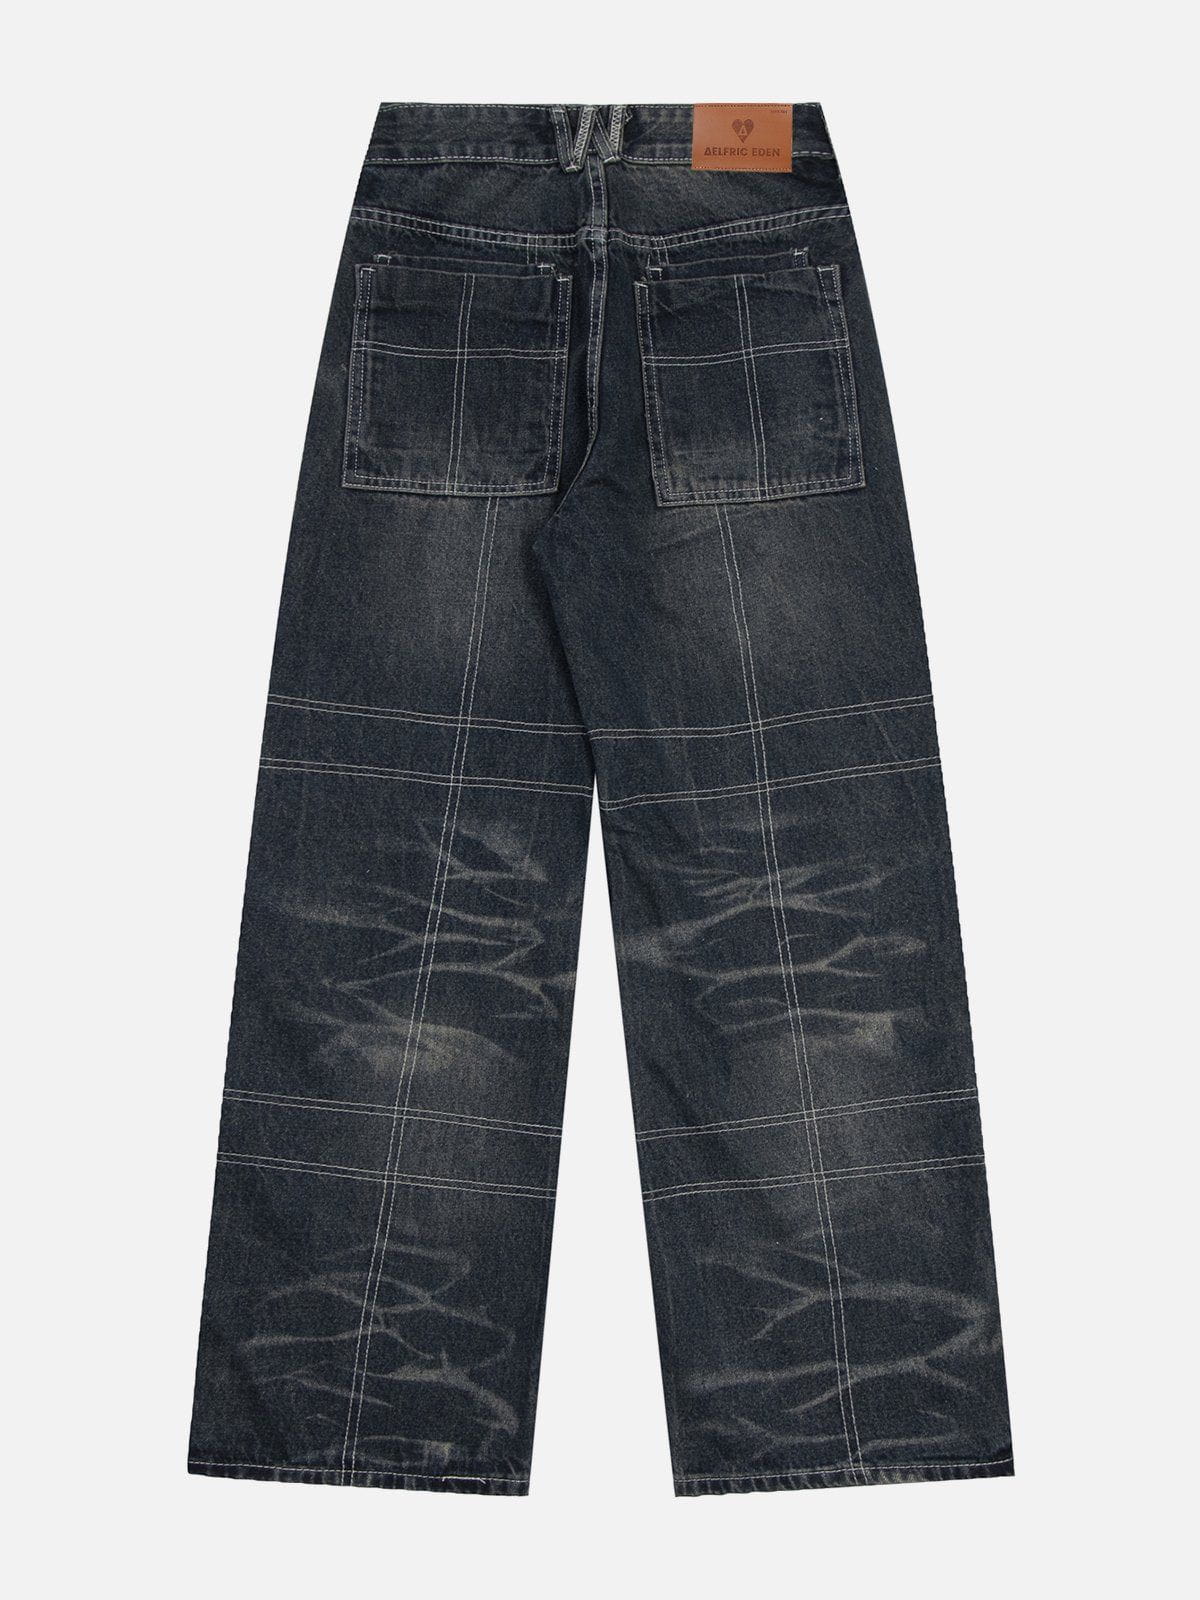 Aelfric Eden Line Washed Loose Jeans